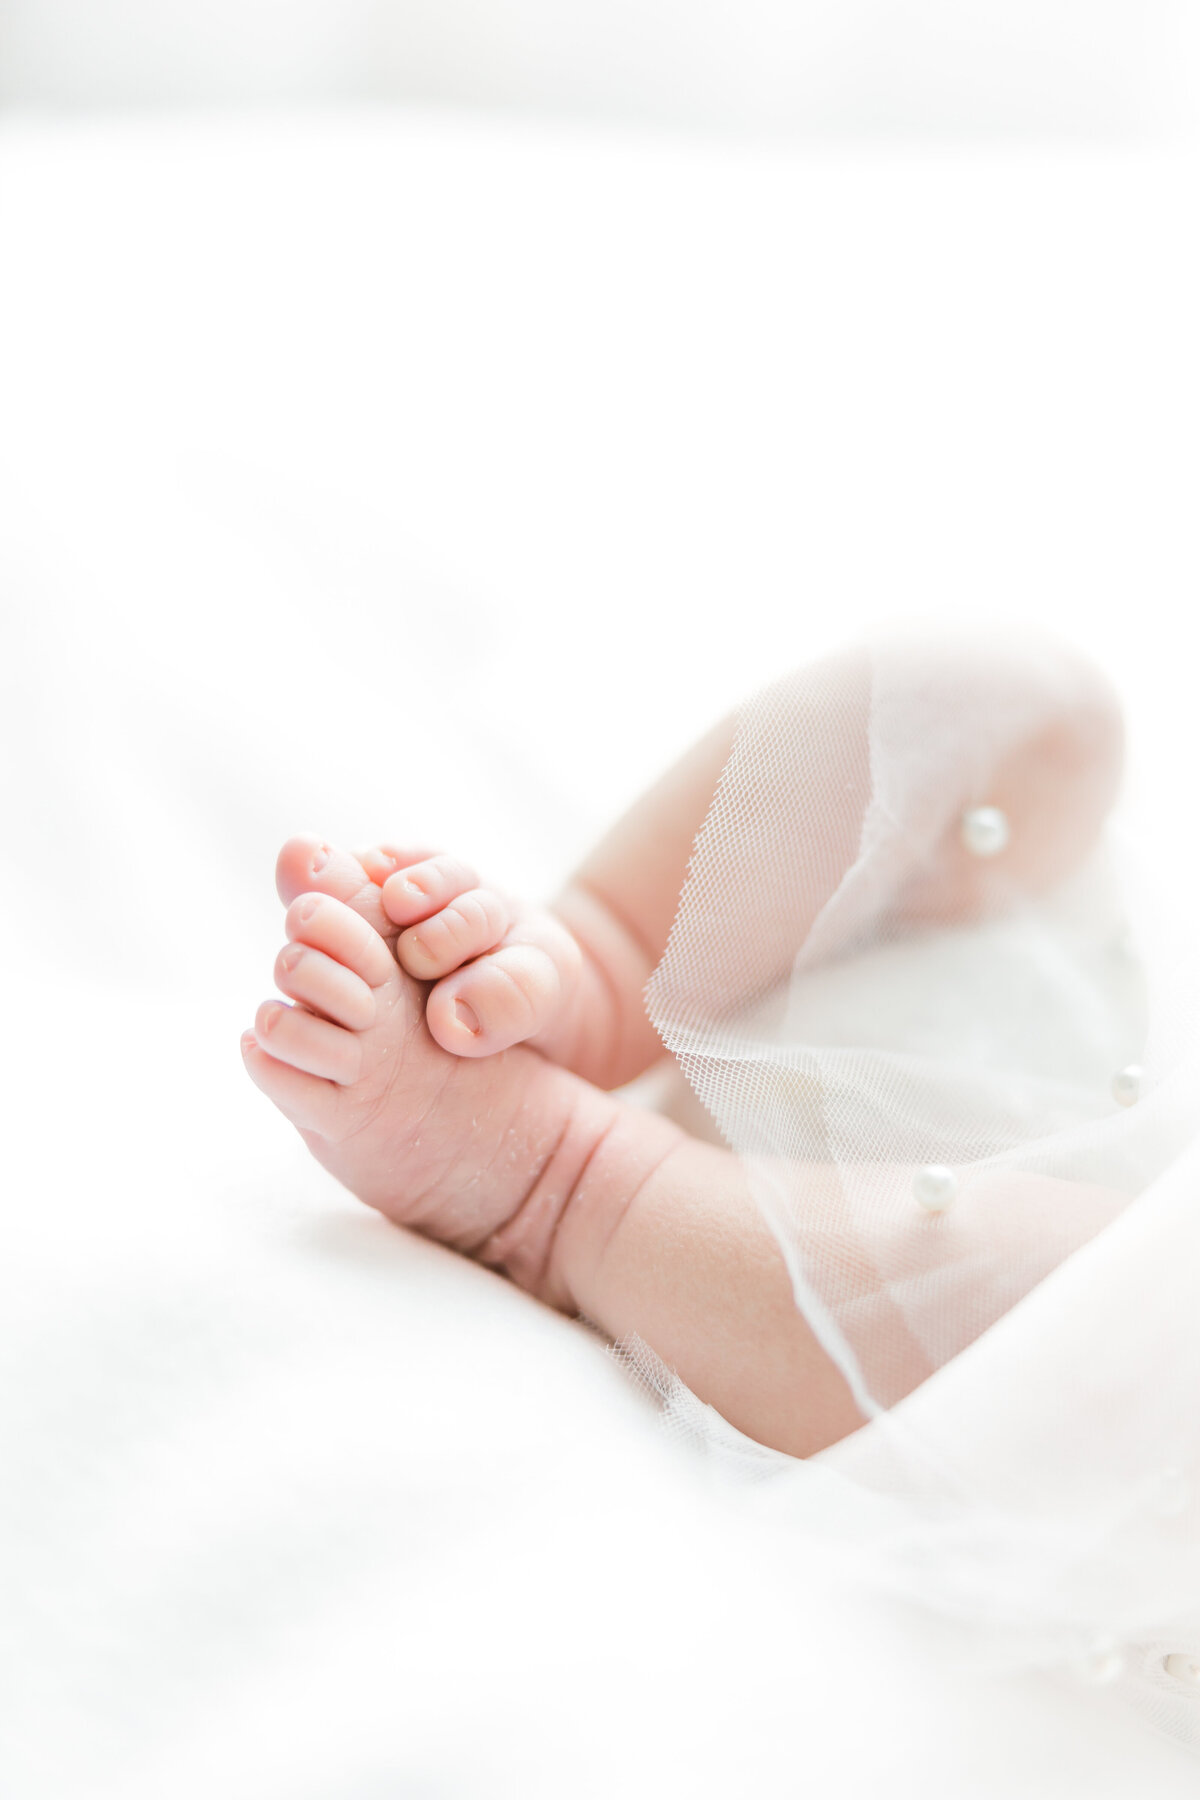 Photo of newborn infant collection focusing on little toe details